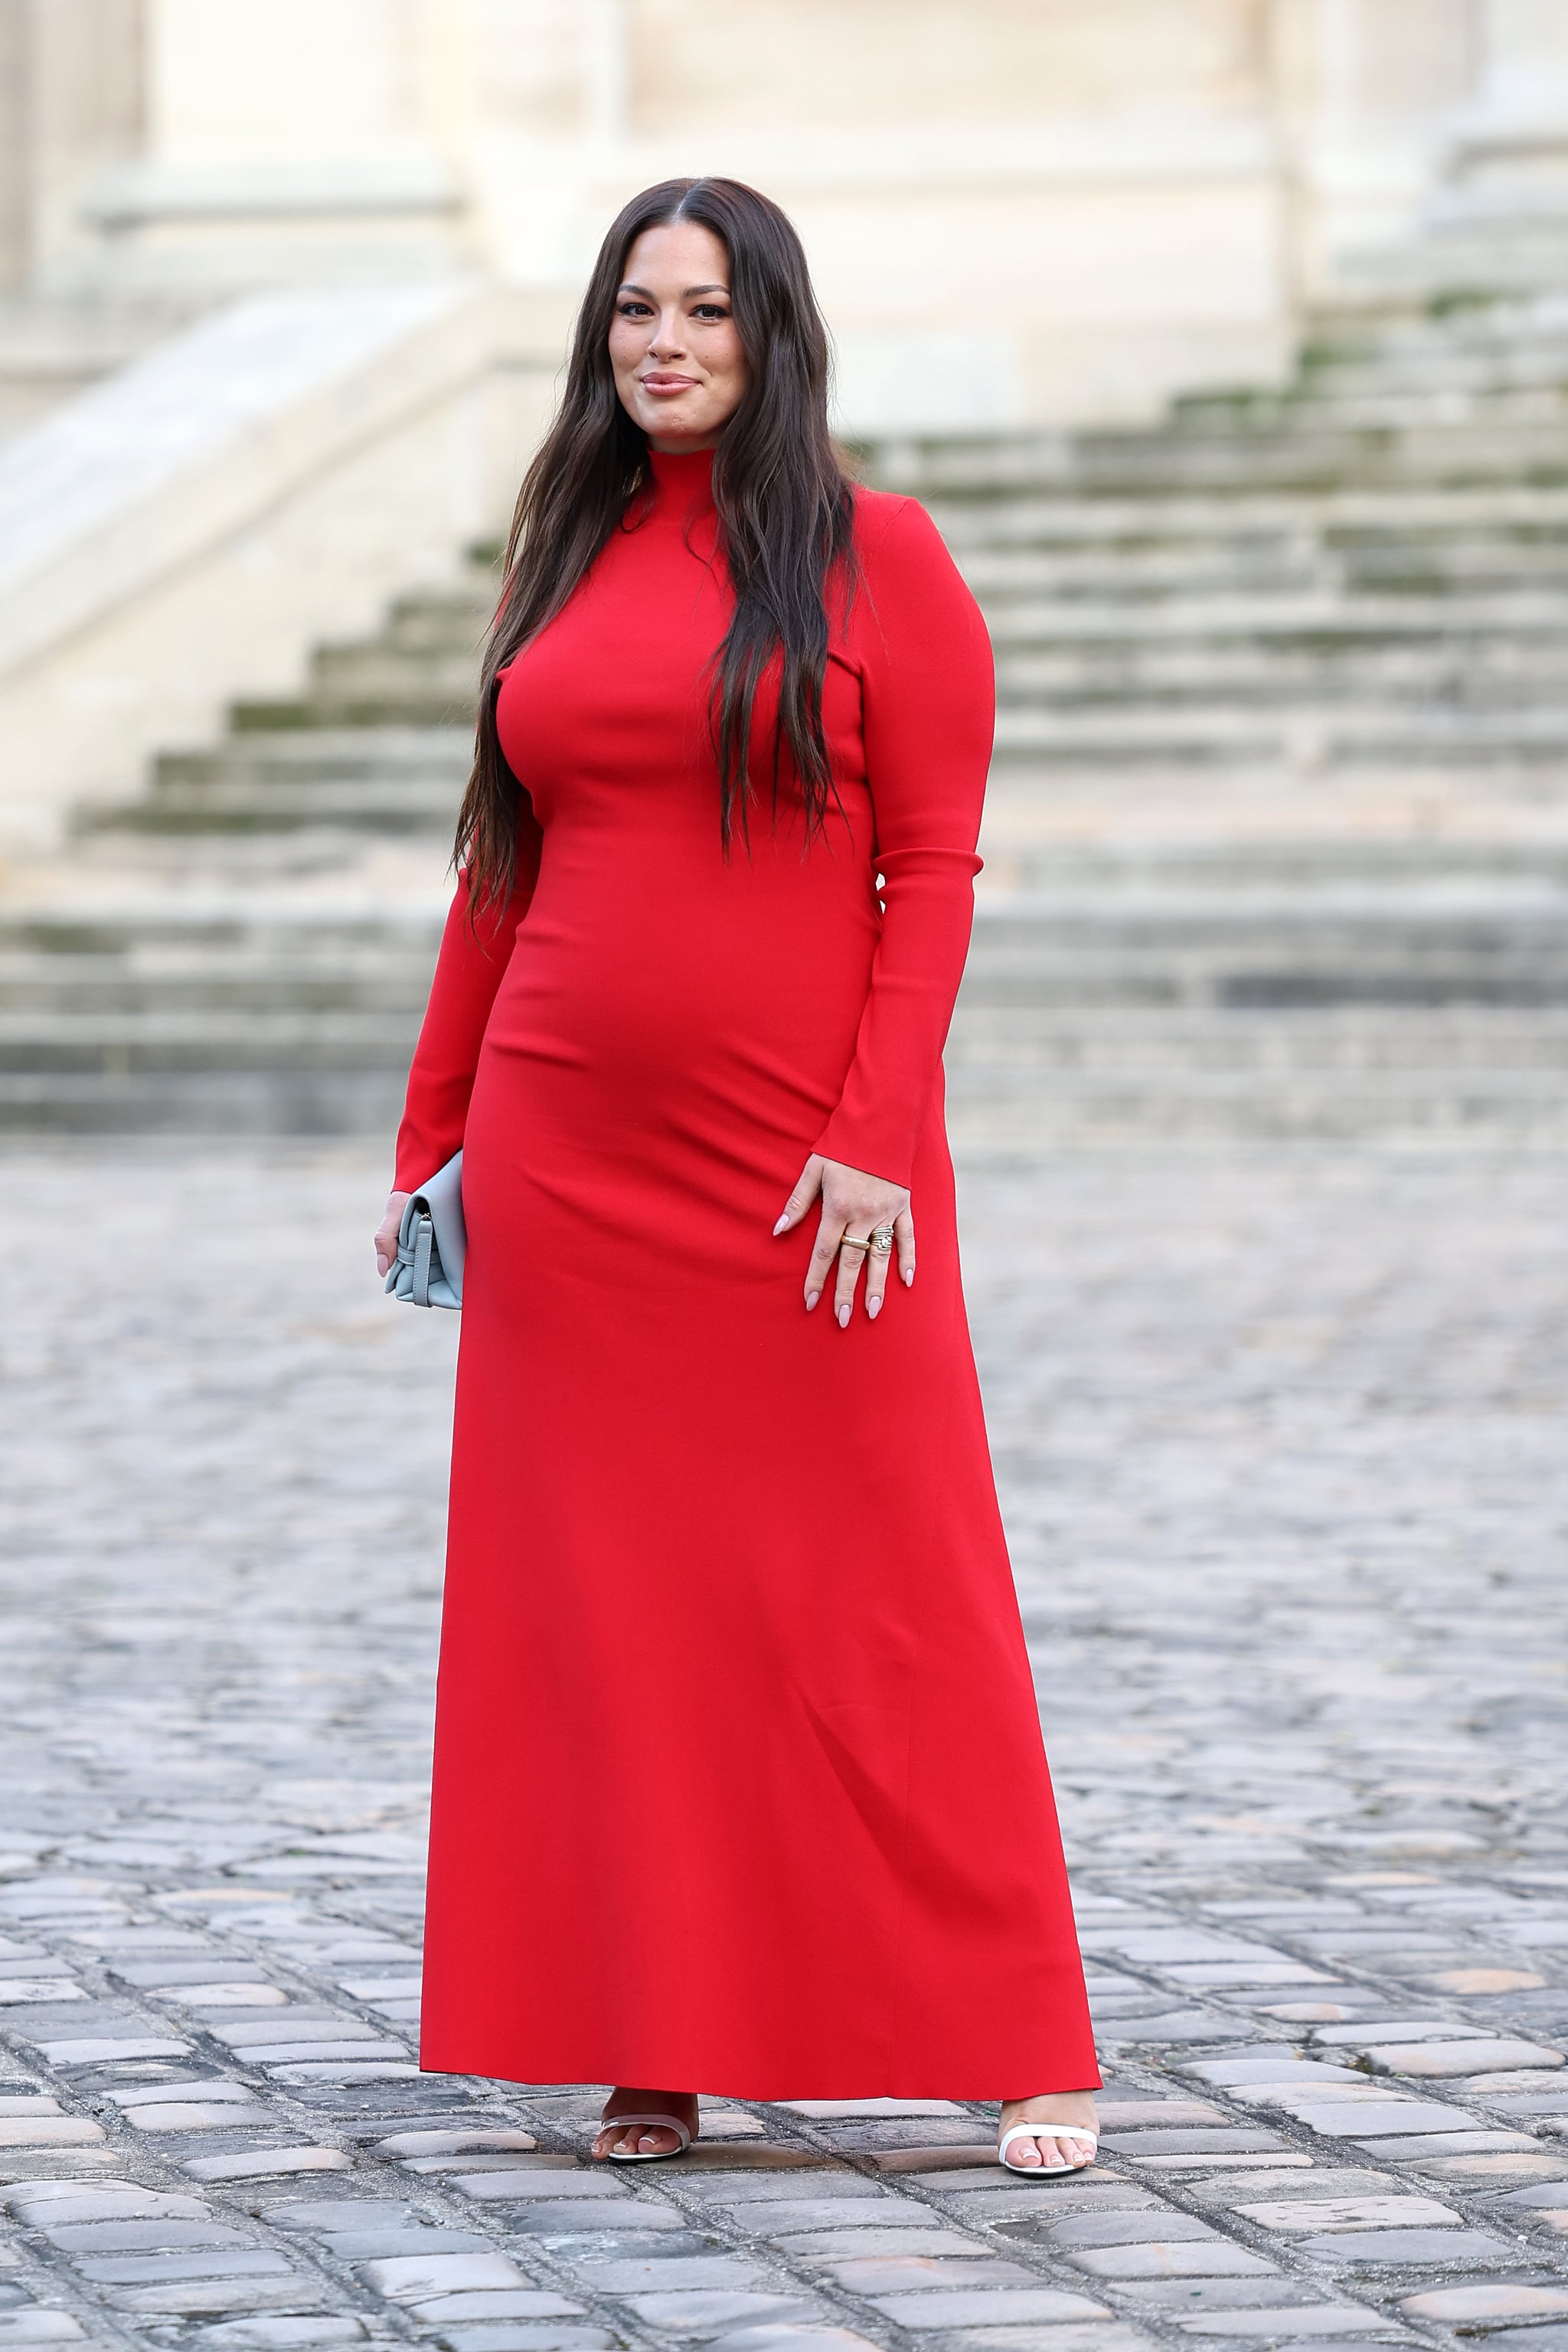 PARIS, FRANCE - MARCH 03:  Ashley Graham attends the Victoria Beckham Womenswear Fall Winter 2023-2024 show as part of Paris Fashion Week on March 03, 2023 in Paris, France. (Photo by Vittorio Zunino Celotto/Getty Images)